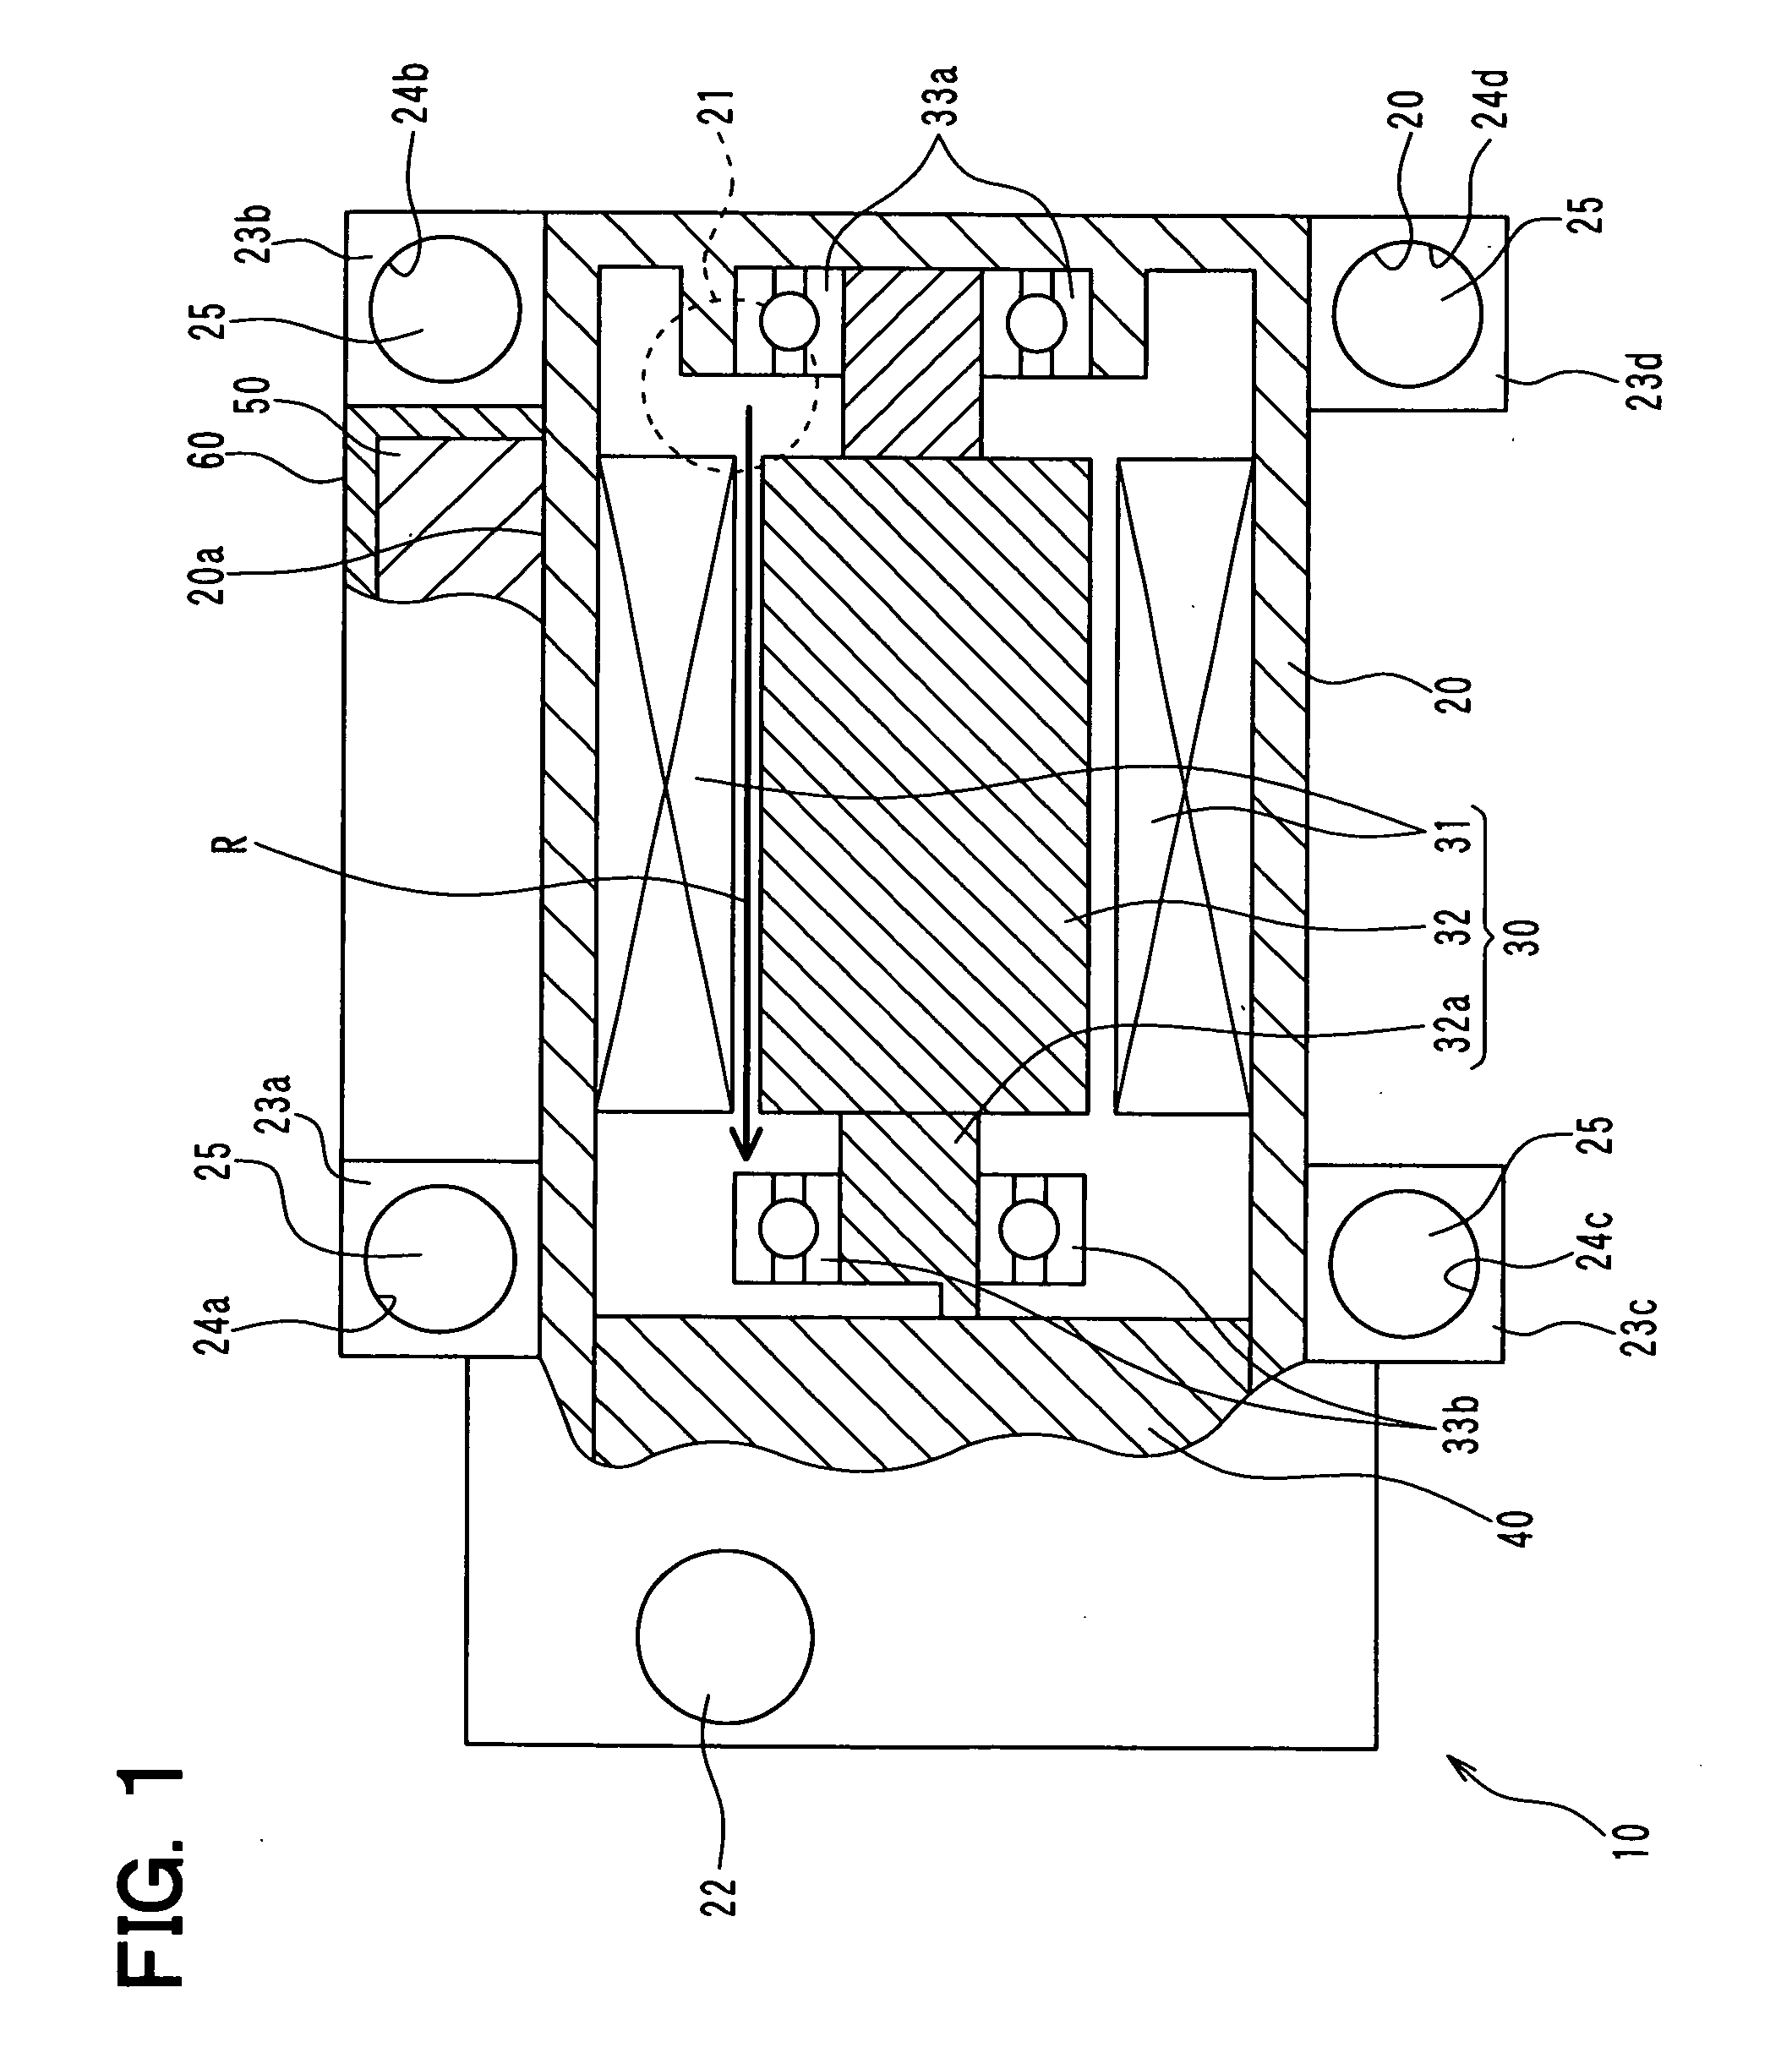 Driving apparatus for a vehicle-mounted electric motor